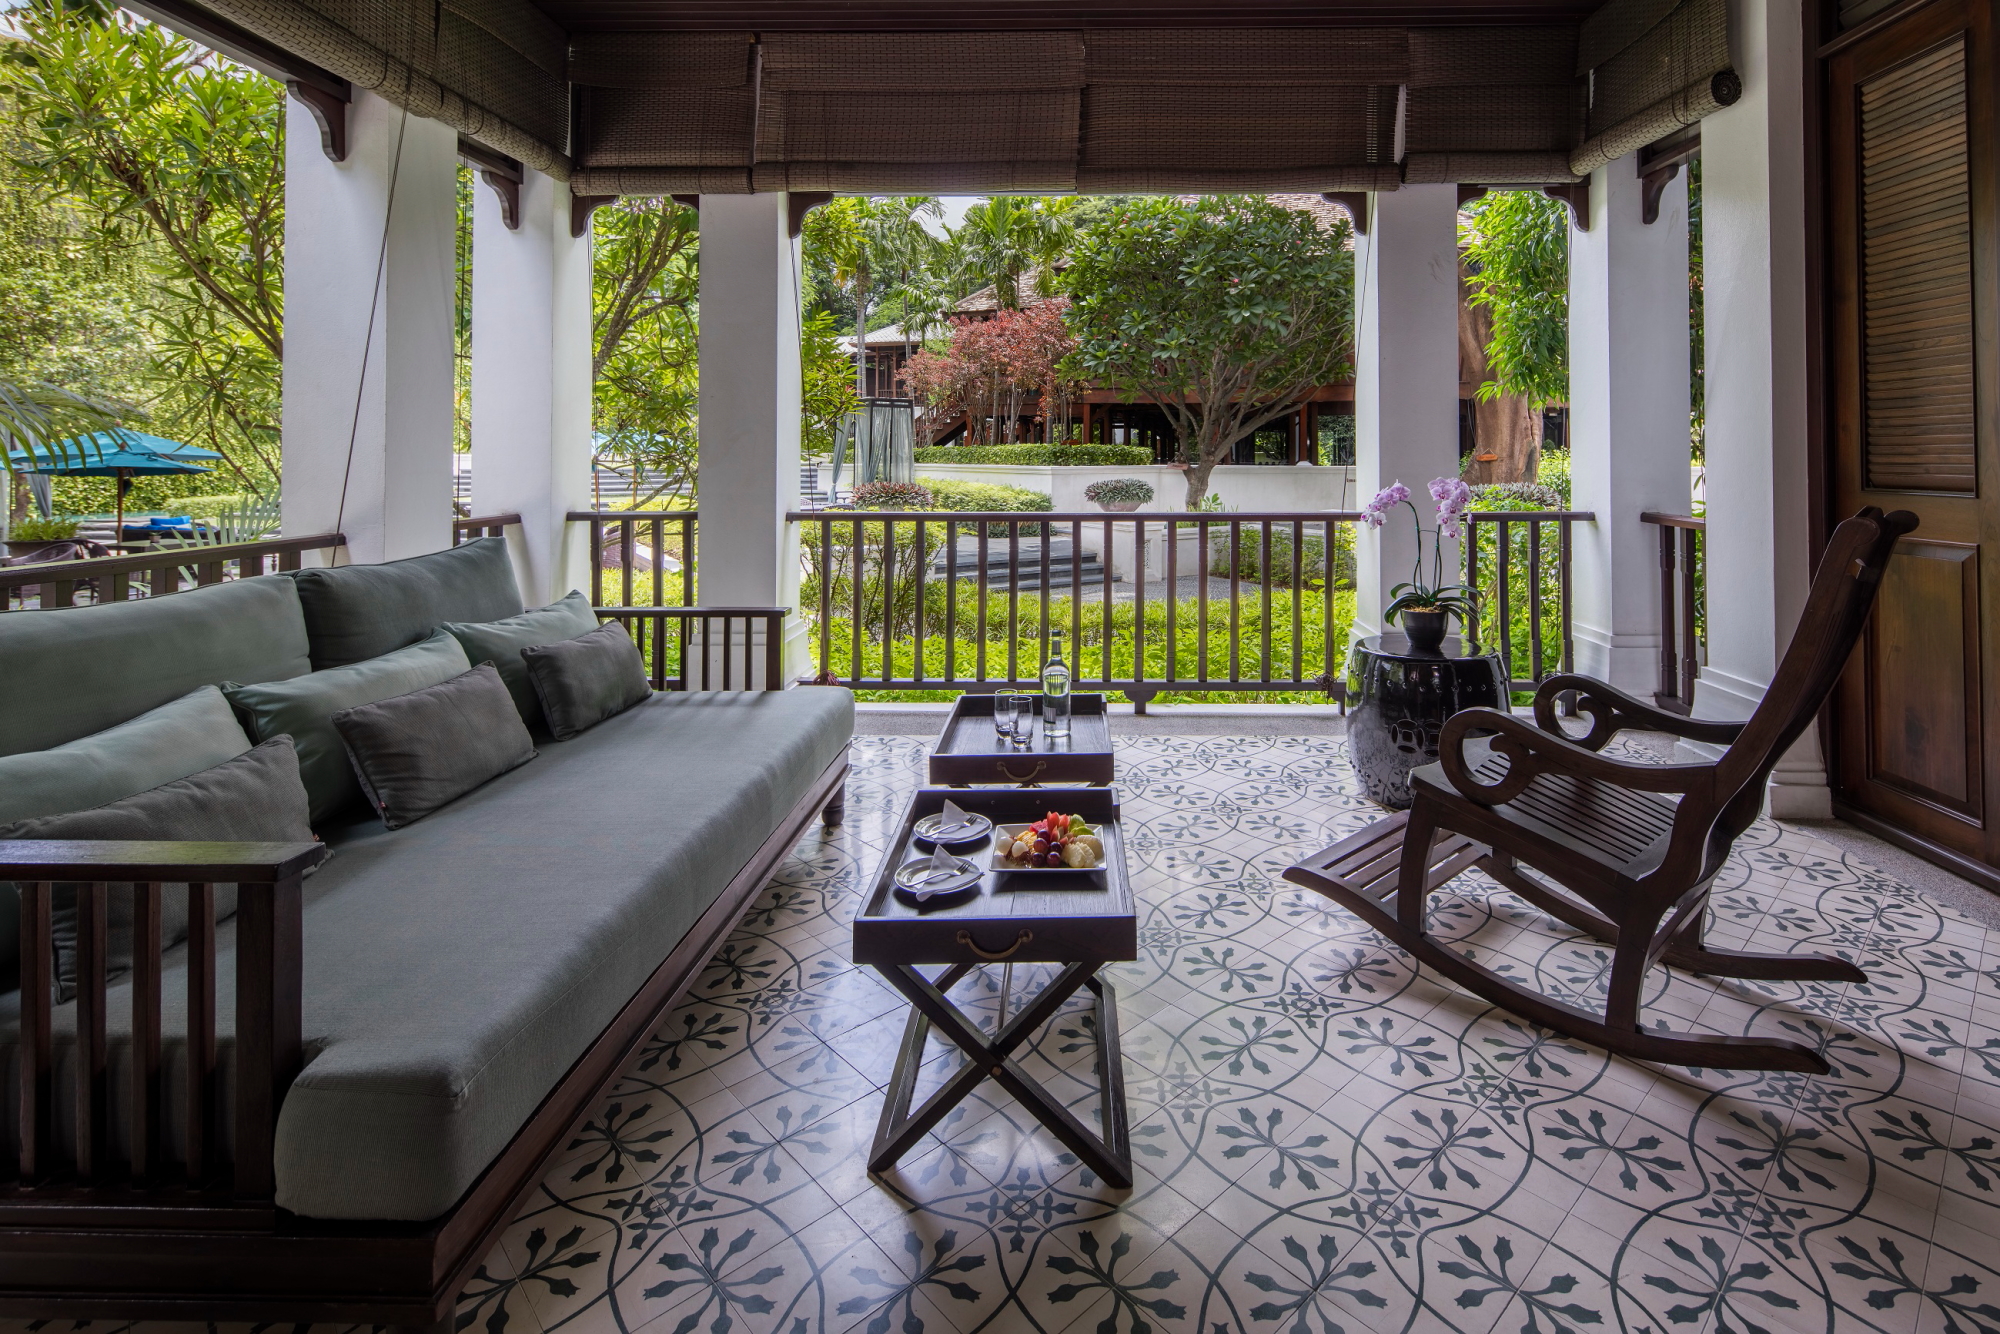 137 Pillars House Chiang Mai is one of the very best boutique resorts in the world. It has been widely praised for its many different sustainable initiatives and has unveiled plans to do even more. Click to enlarge.